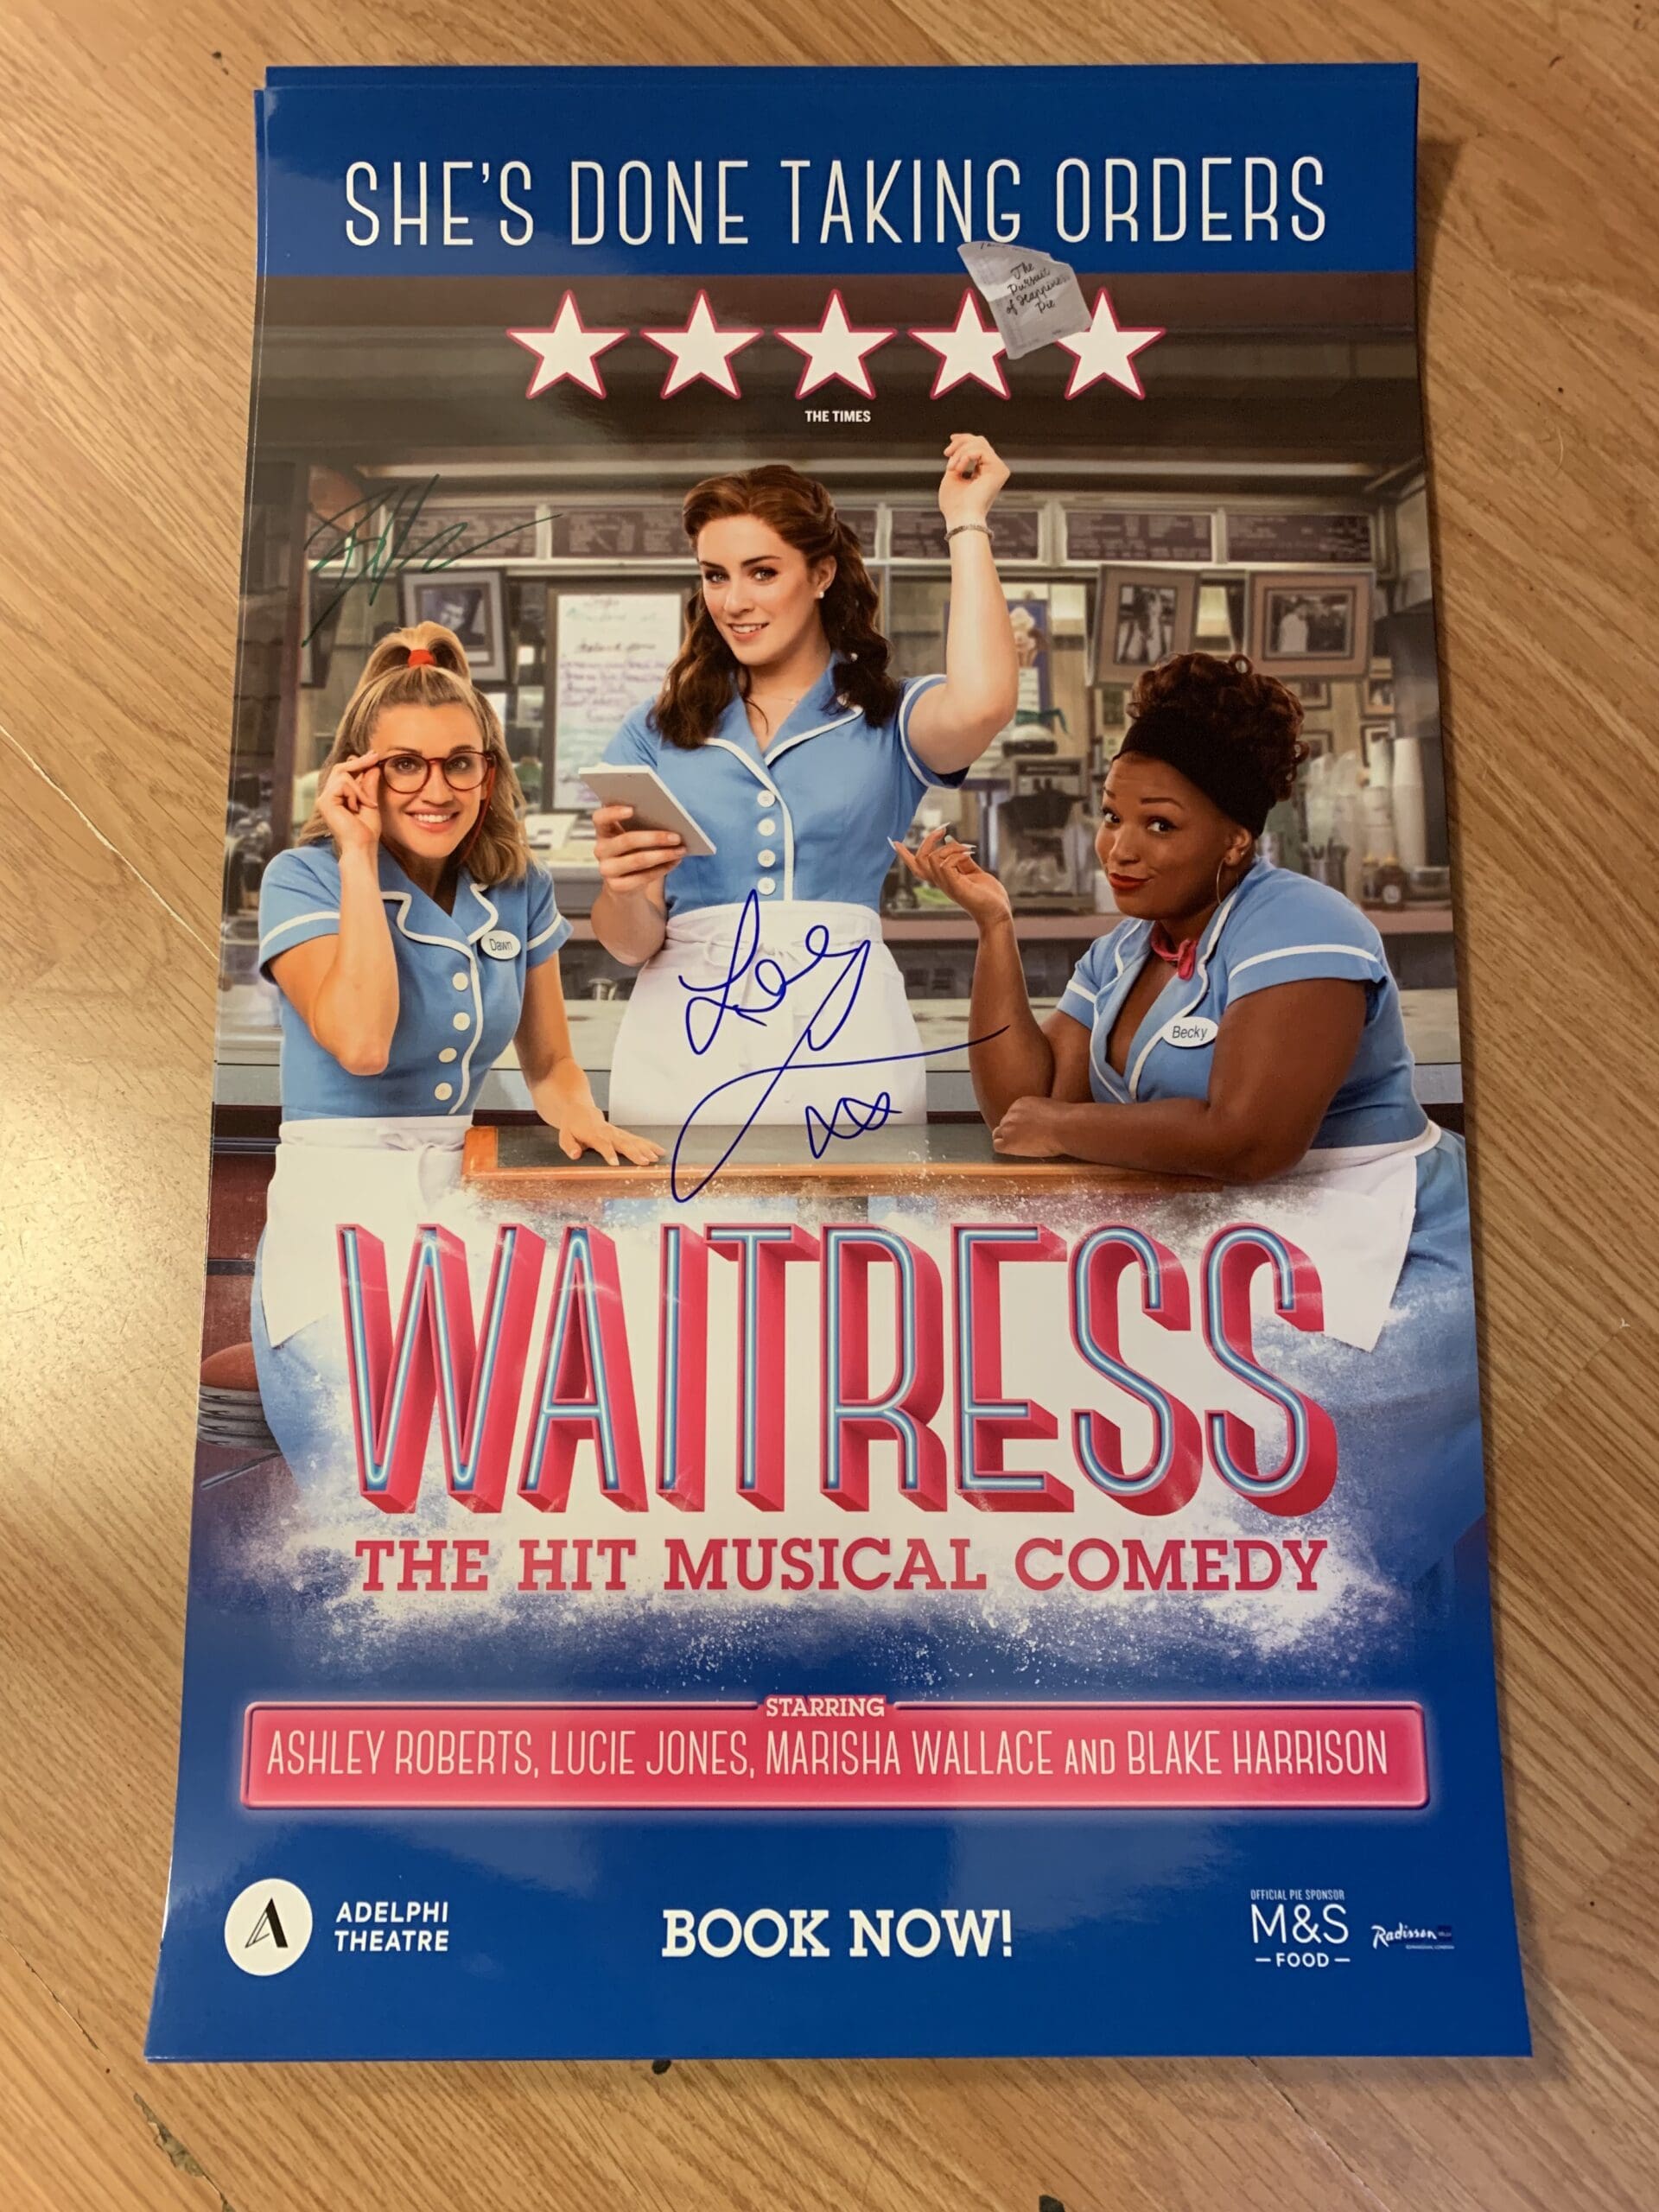 Featured image for “Enter our competition for a chance to win a Waitress poster signed by Blake Harrison and Lucie Jones”